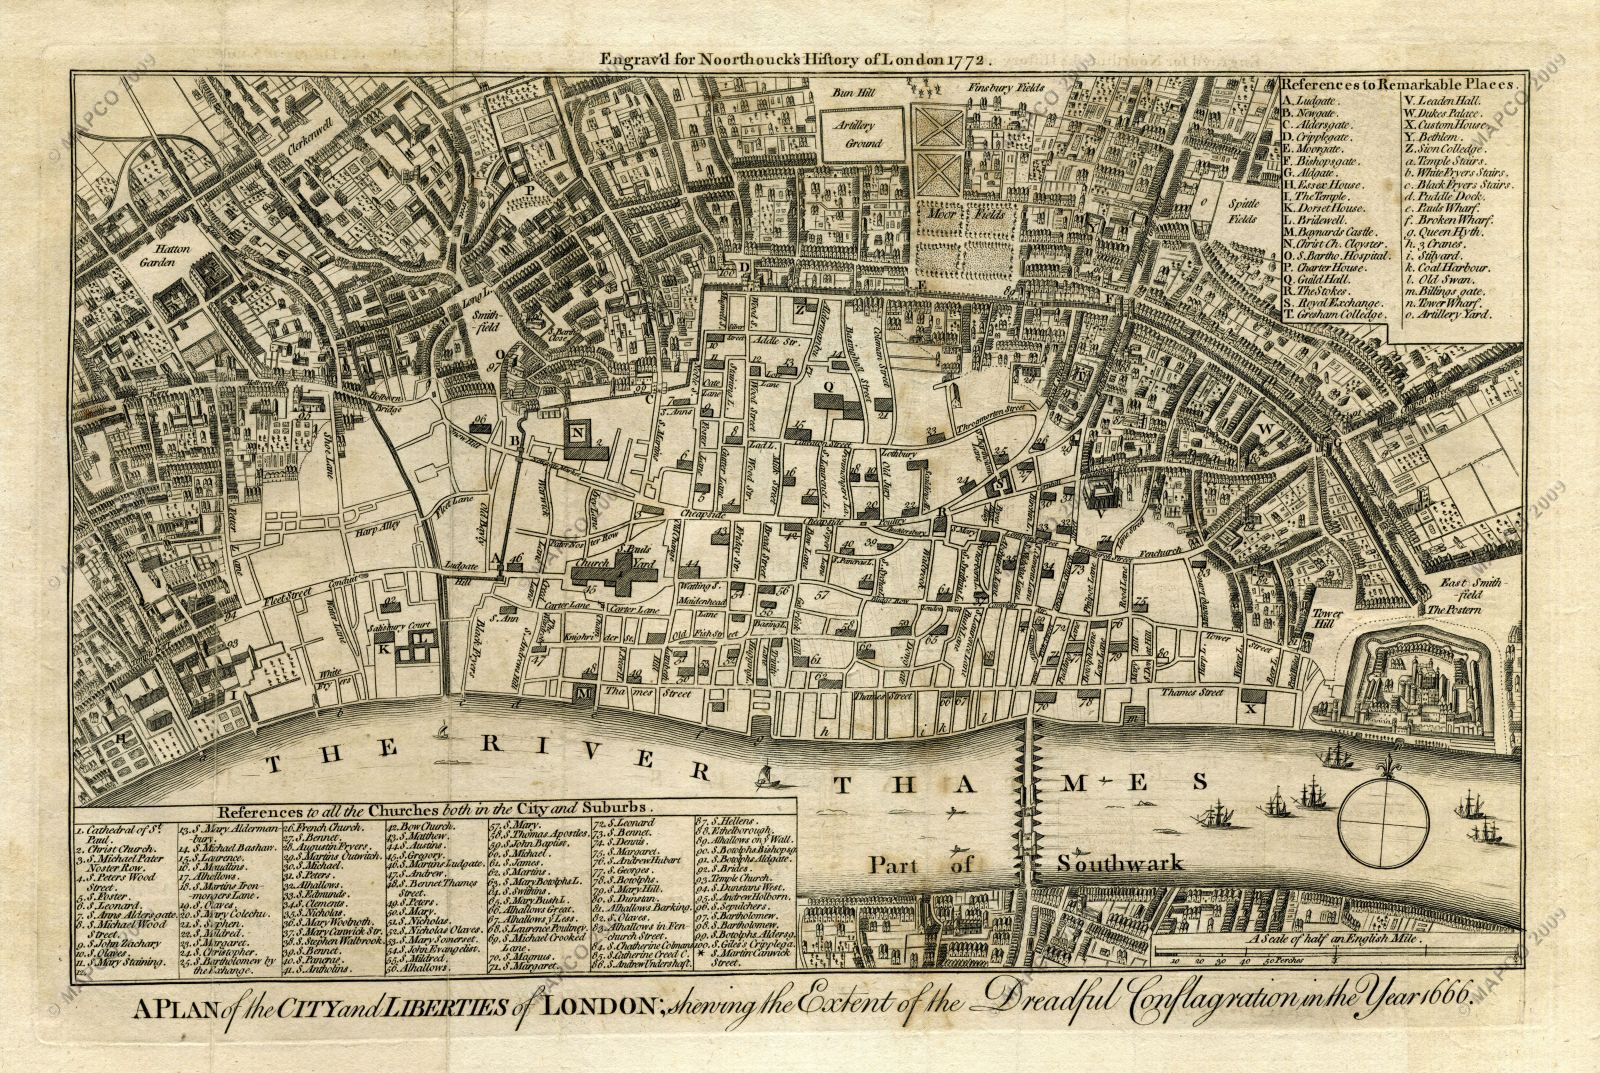 A Plan of the City and Liberties of London; Shewing the Extent of the Dreadful Conflagration in the Year 1666 (Wenceslaus Hollar). Image courtesy of Map and Plan Collection Online (MAPCO).